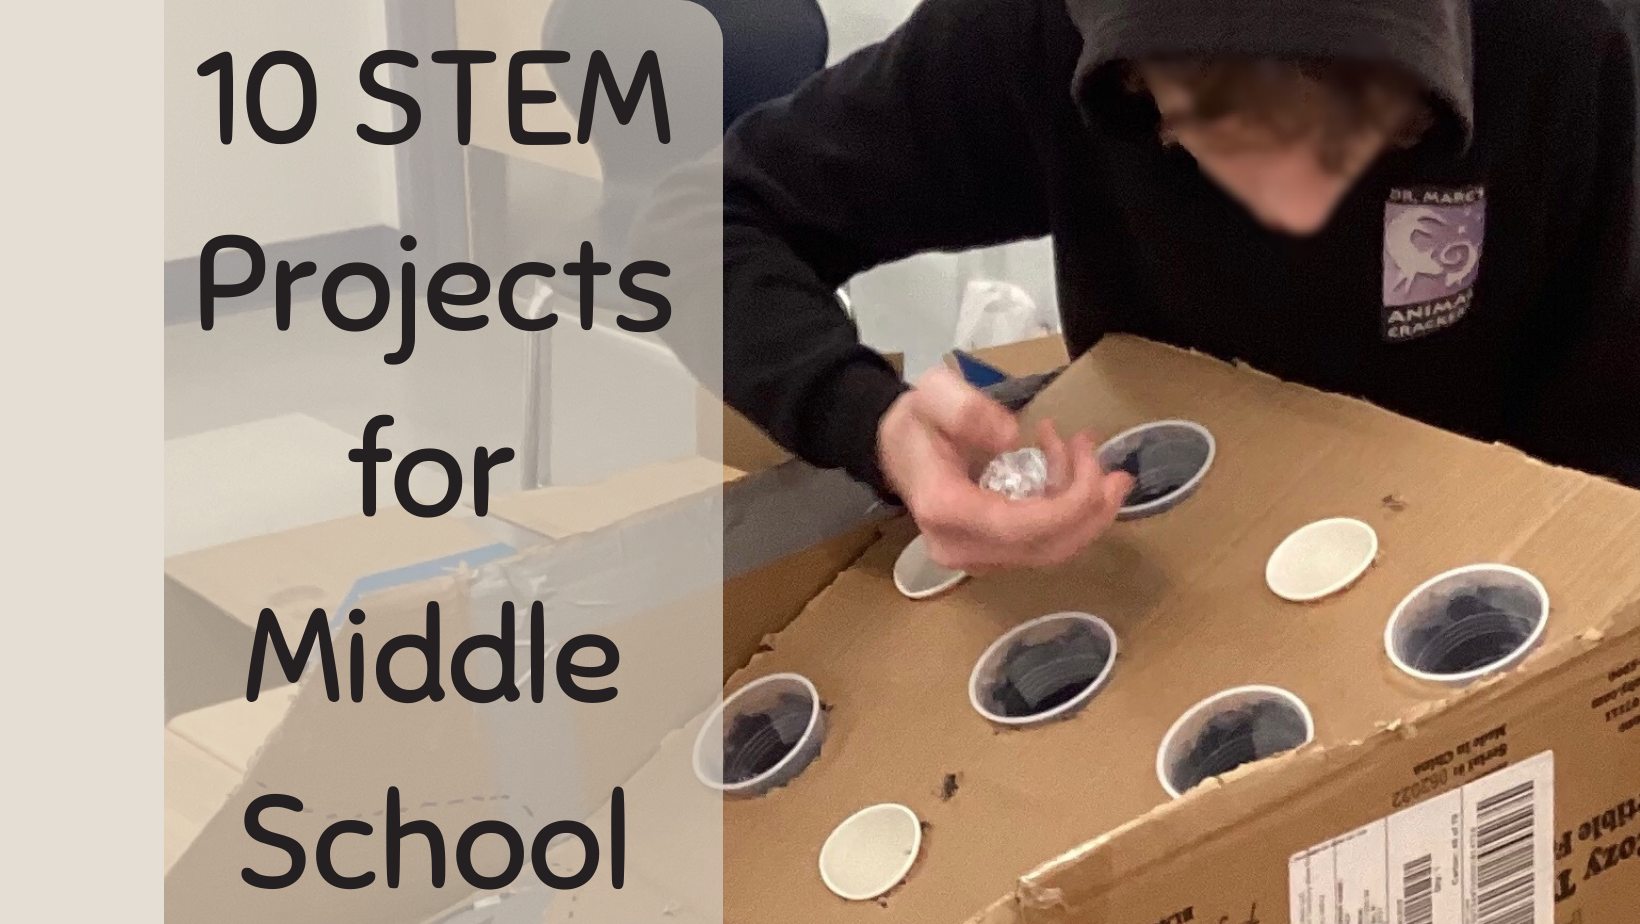 10 stem projects for middle school- science by sinai